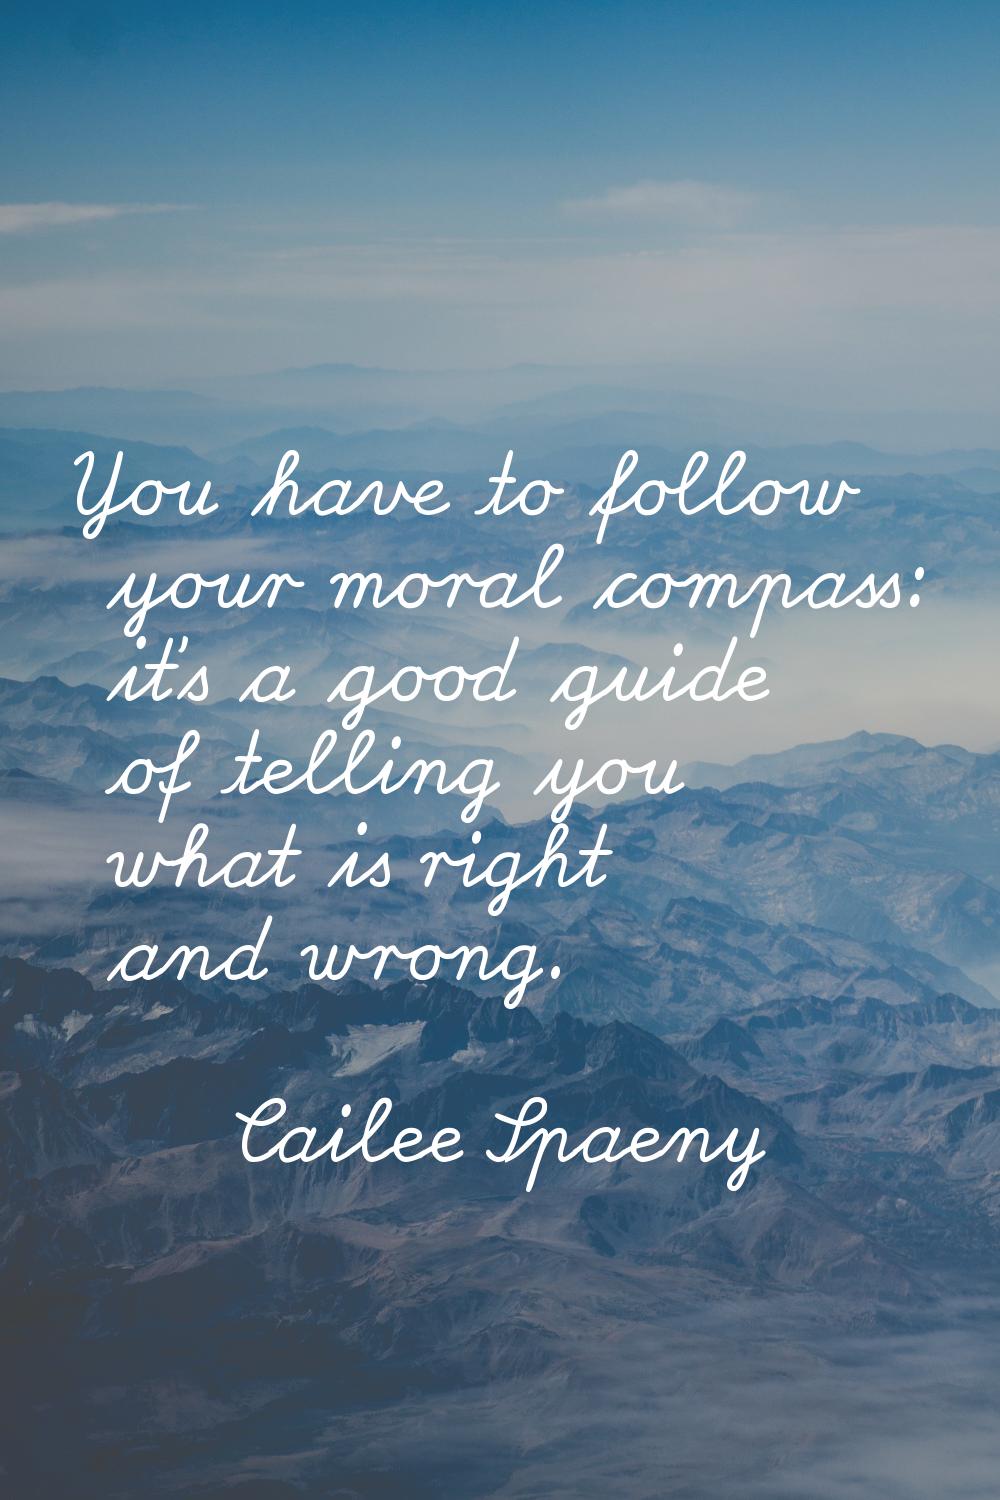 You have to follow your moral compass: it's a good guide of telling you what is right and wrong.